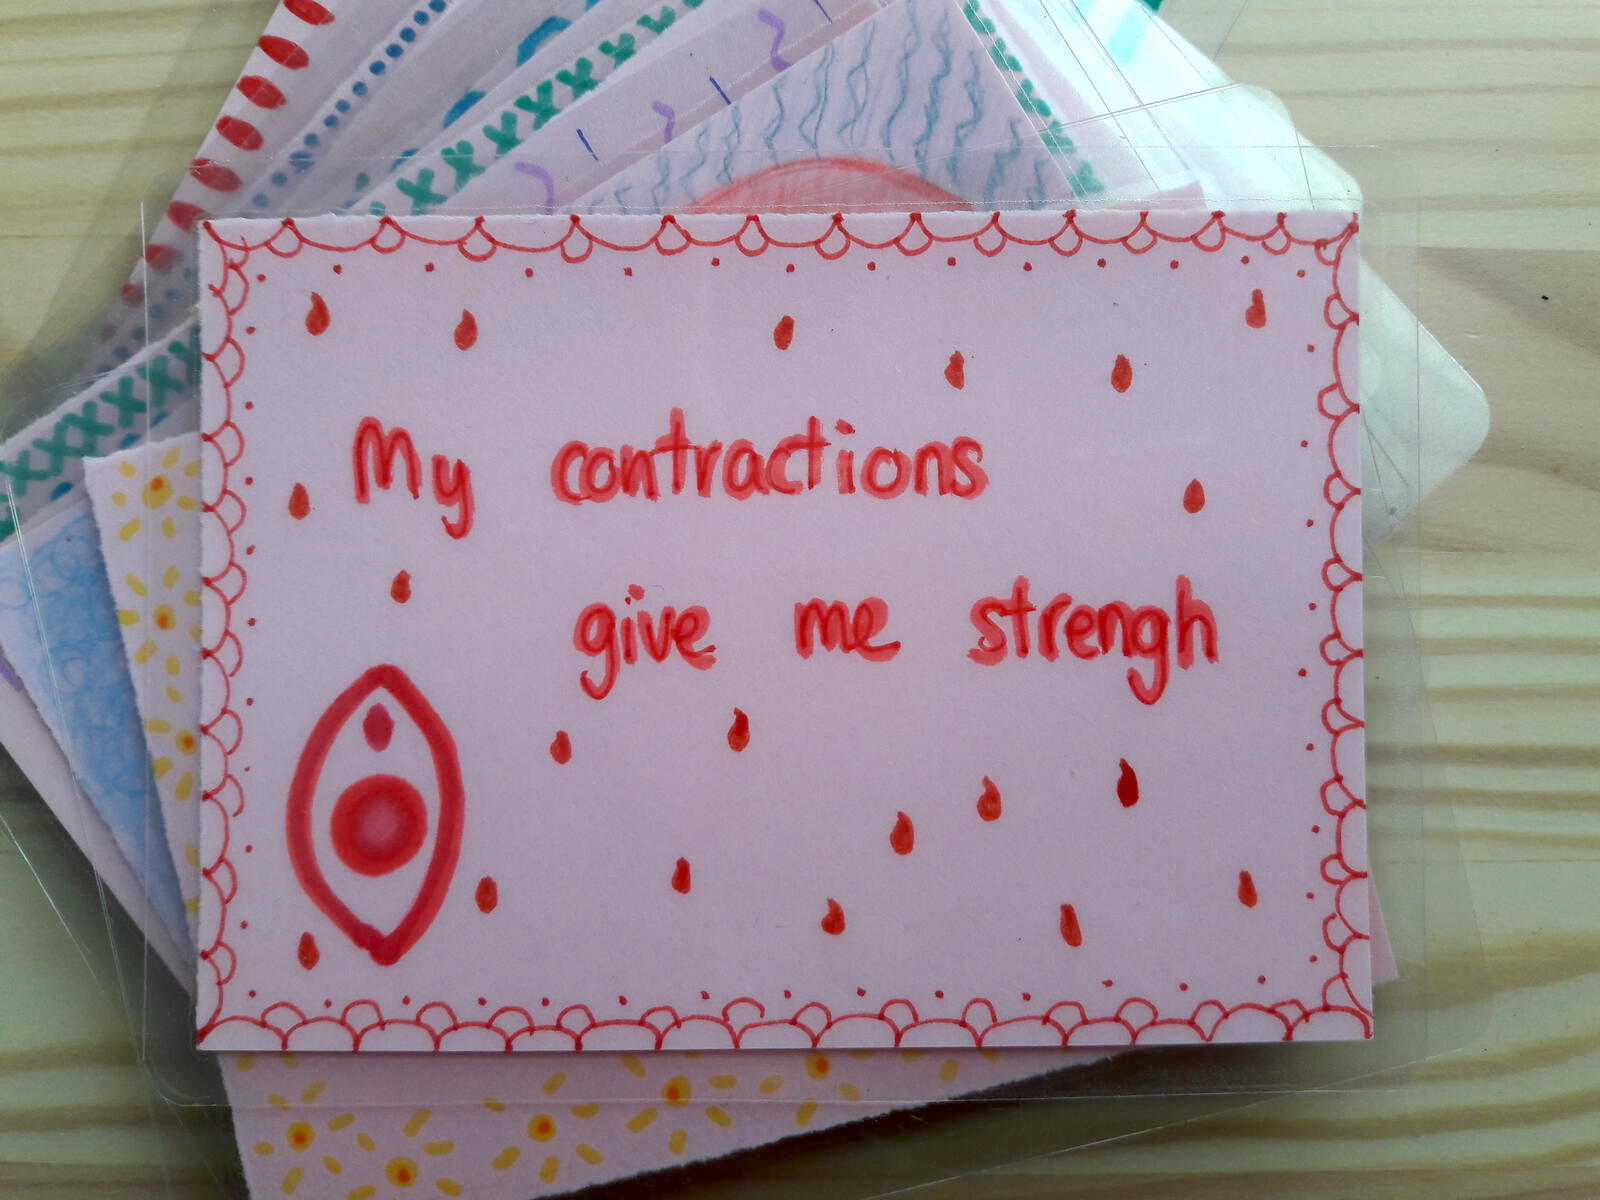 My contractions give me strength